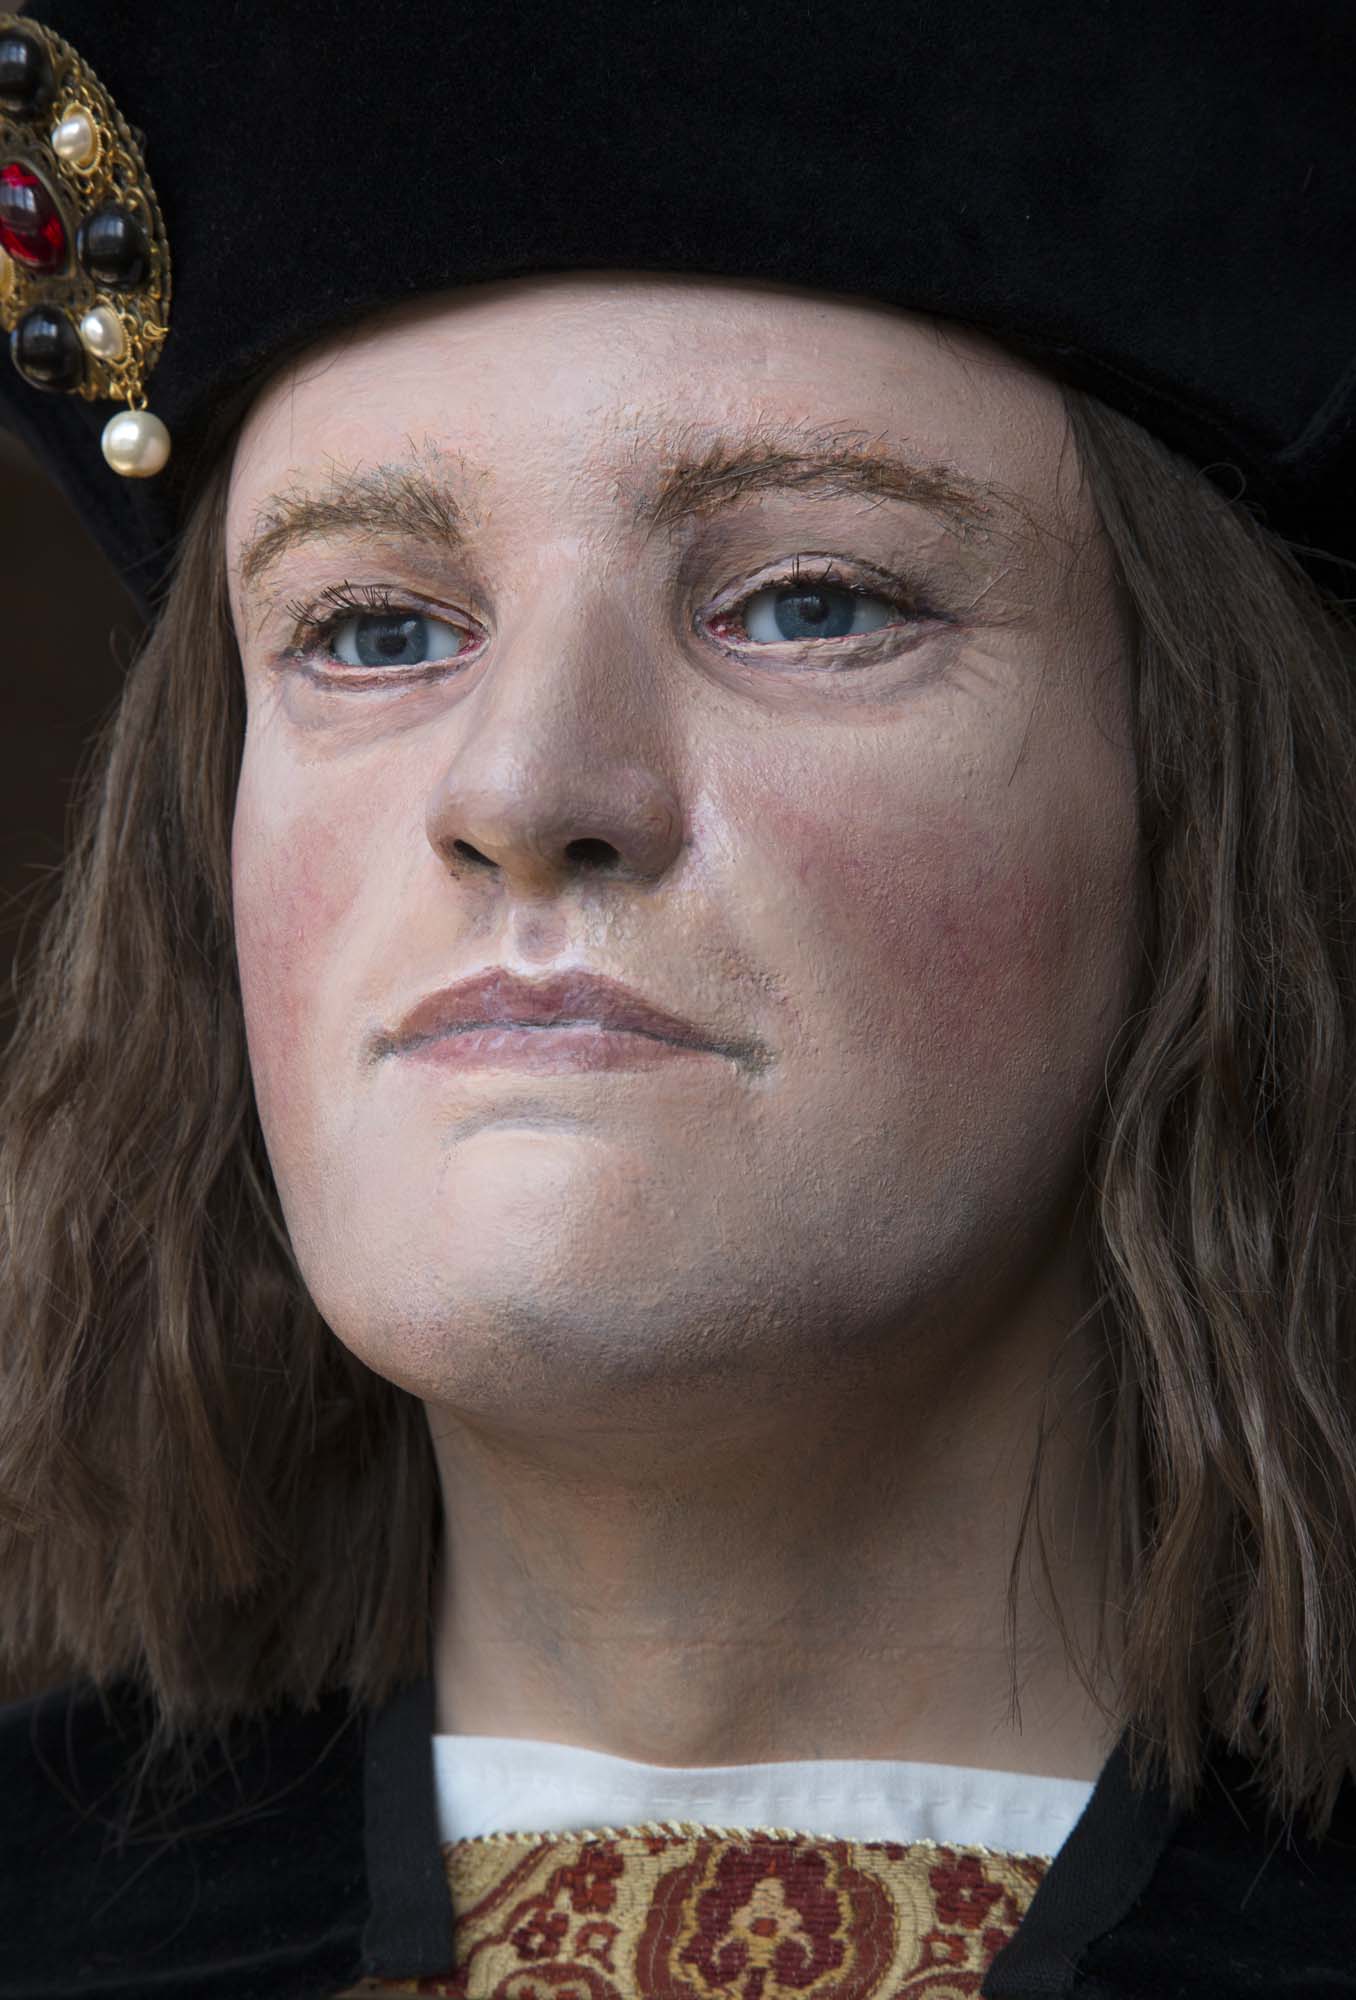 Facial reconstruction of Richard III, modelled by Professor Caroline Wilkinson. The bust is a representation of Richard's appearance based on scientific interpretation of the anatomical features of the king's skull. - Richard III Society